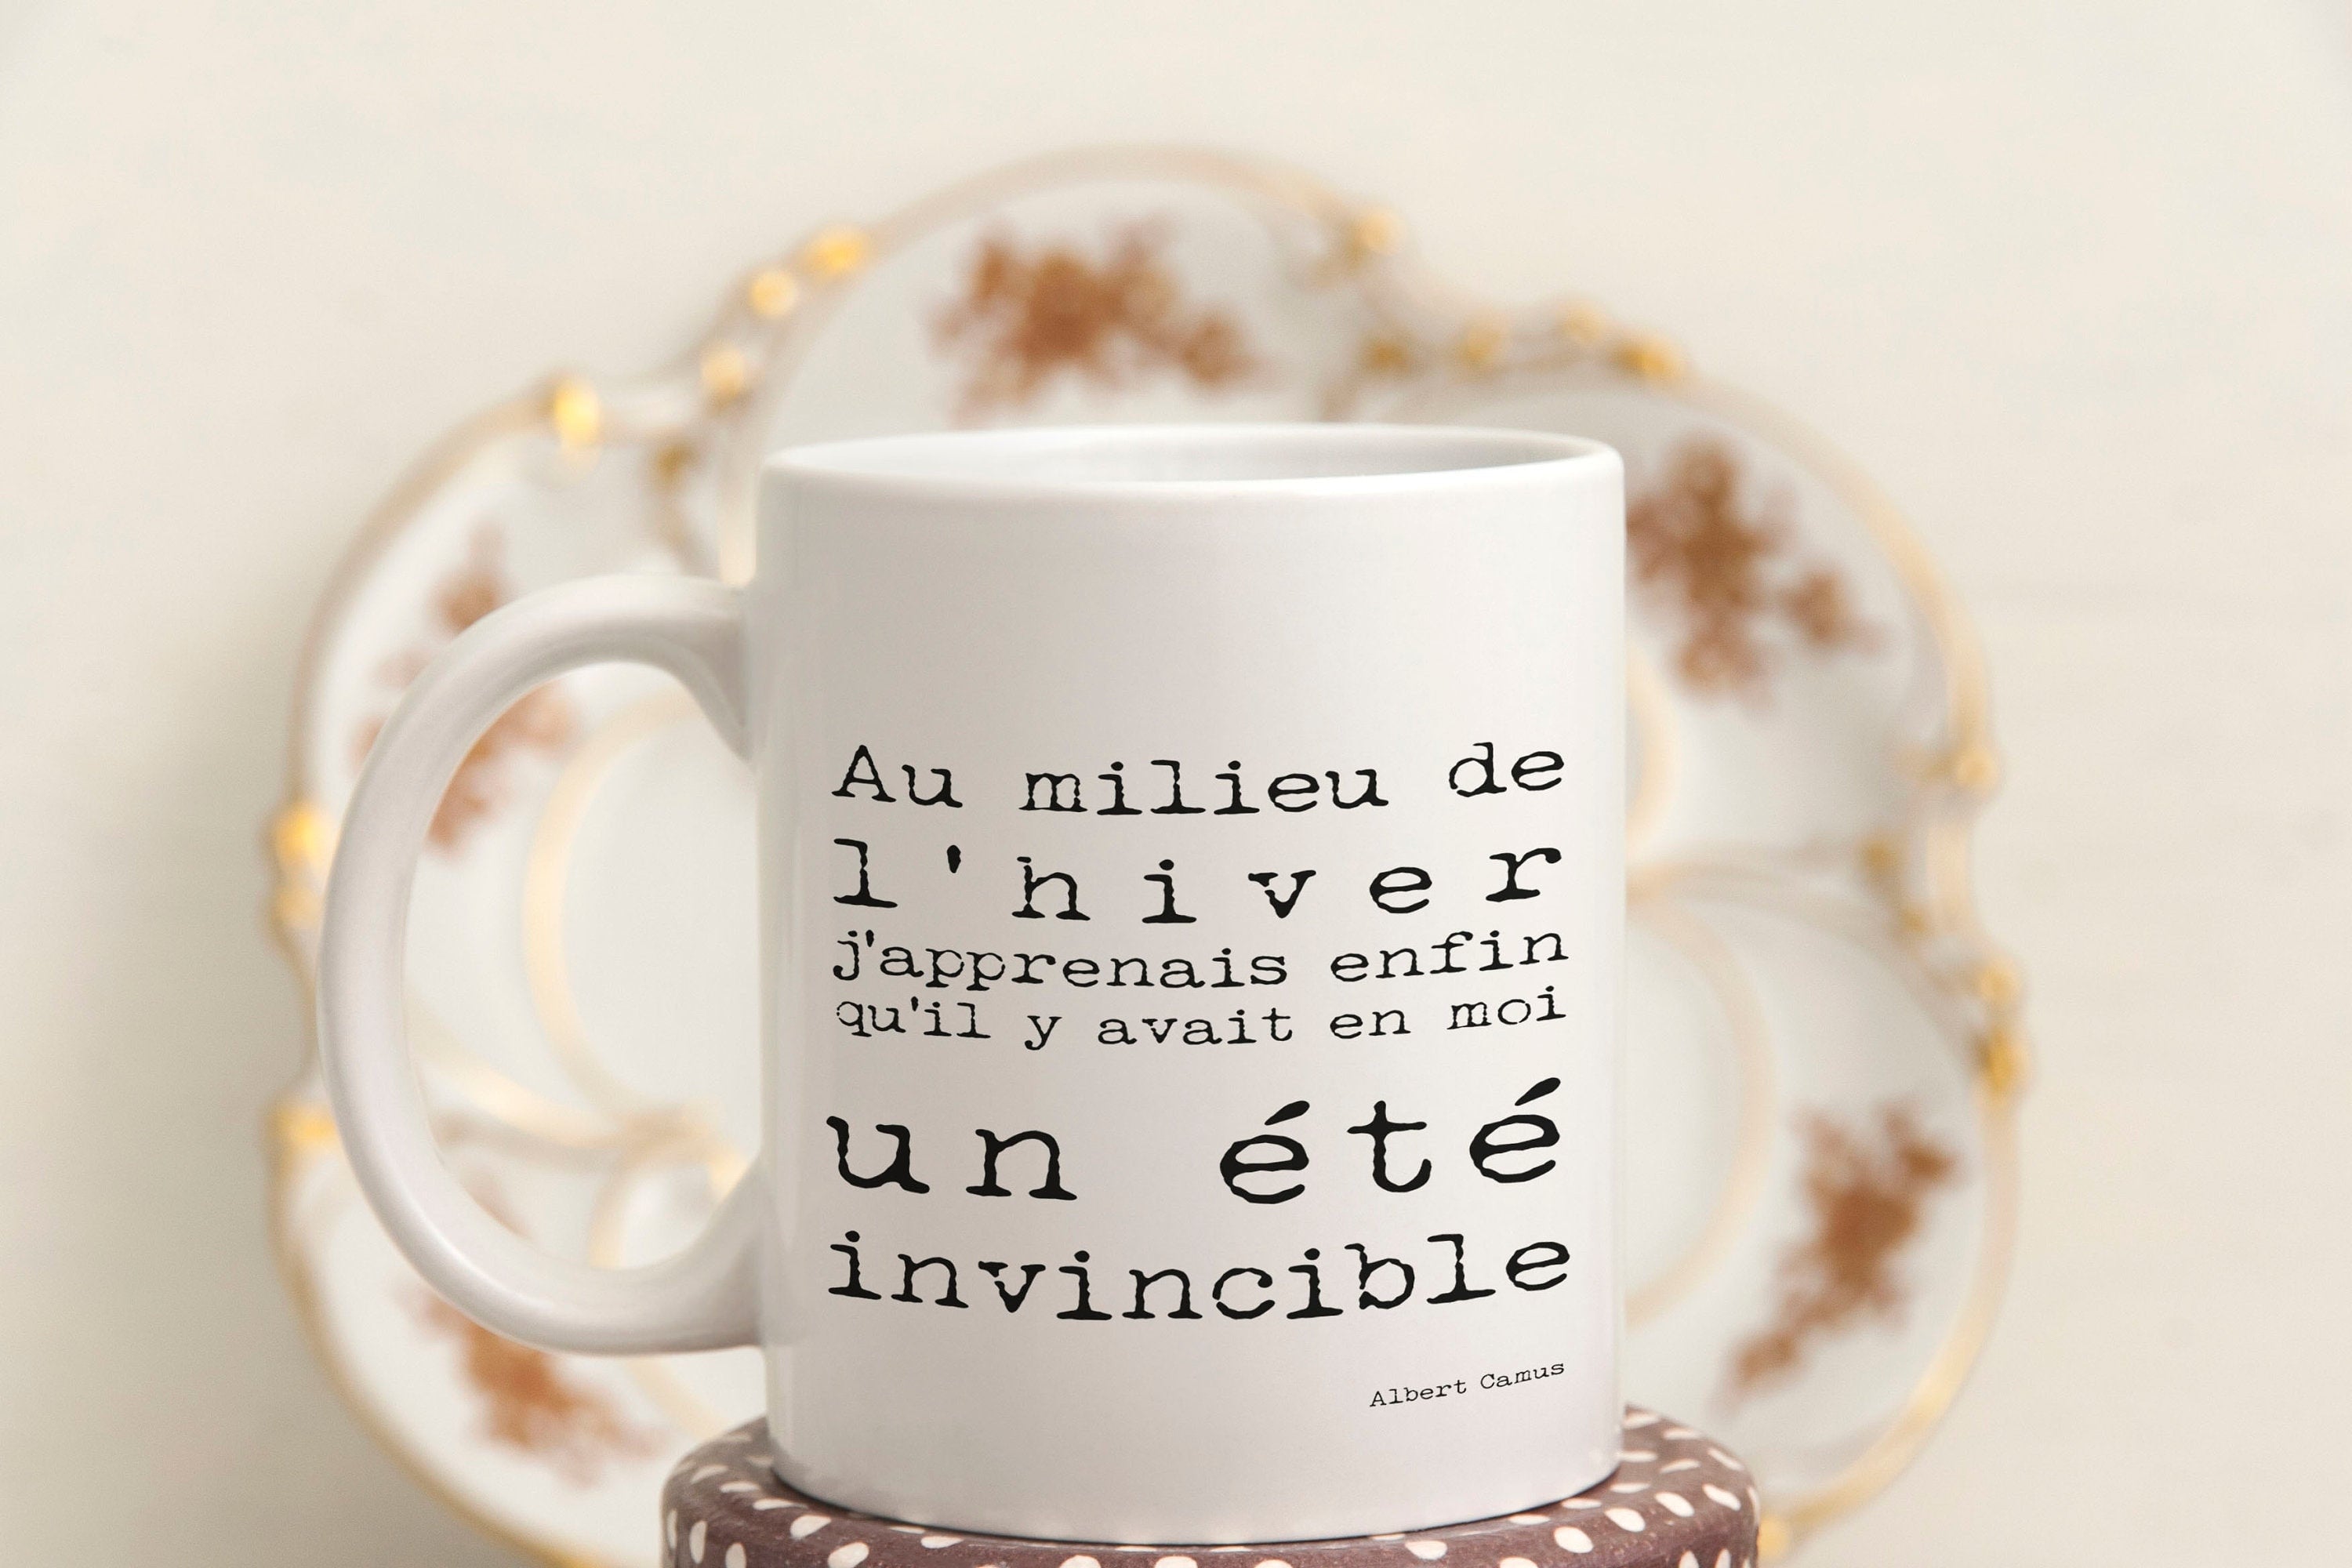 French albert camus quote mug, invincible summer coffee lover gift